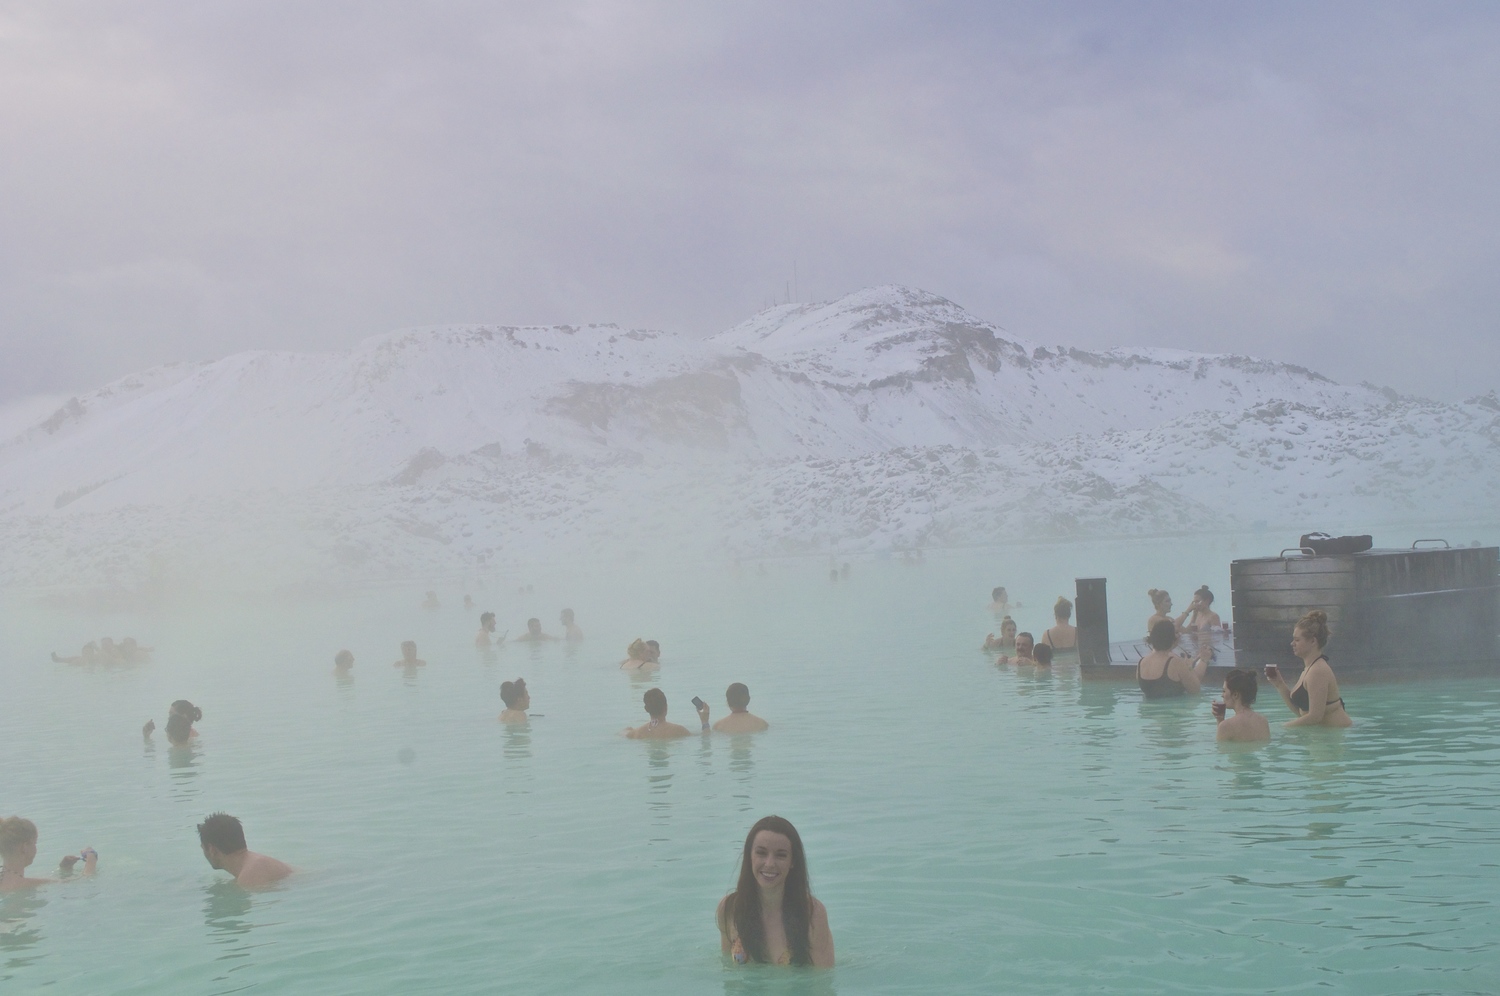 The blue lagoon is surrounded by lava fields covered in freshly fallen snow.